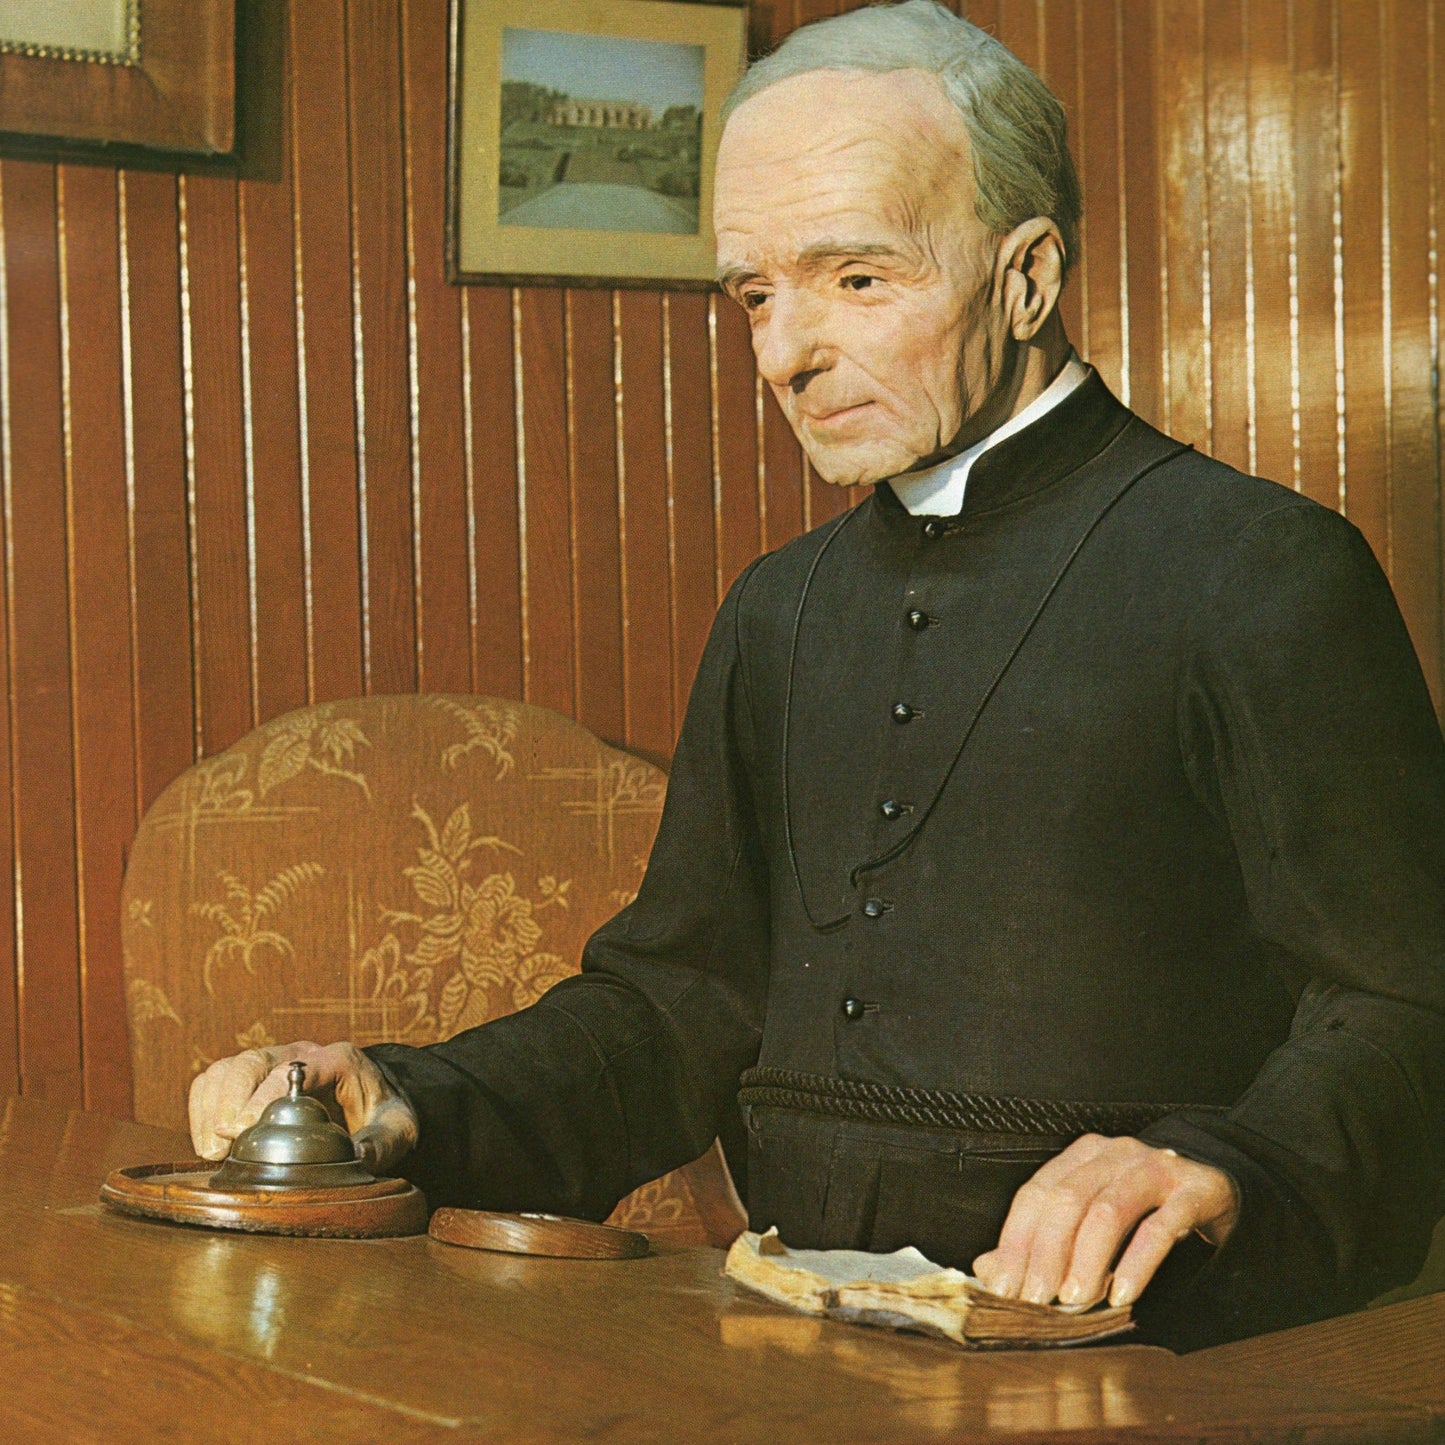 Saint Andre Bessette Video Download MP4 - Bob and Penny Lord